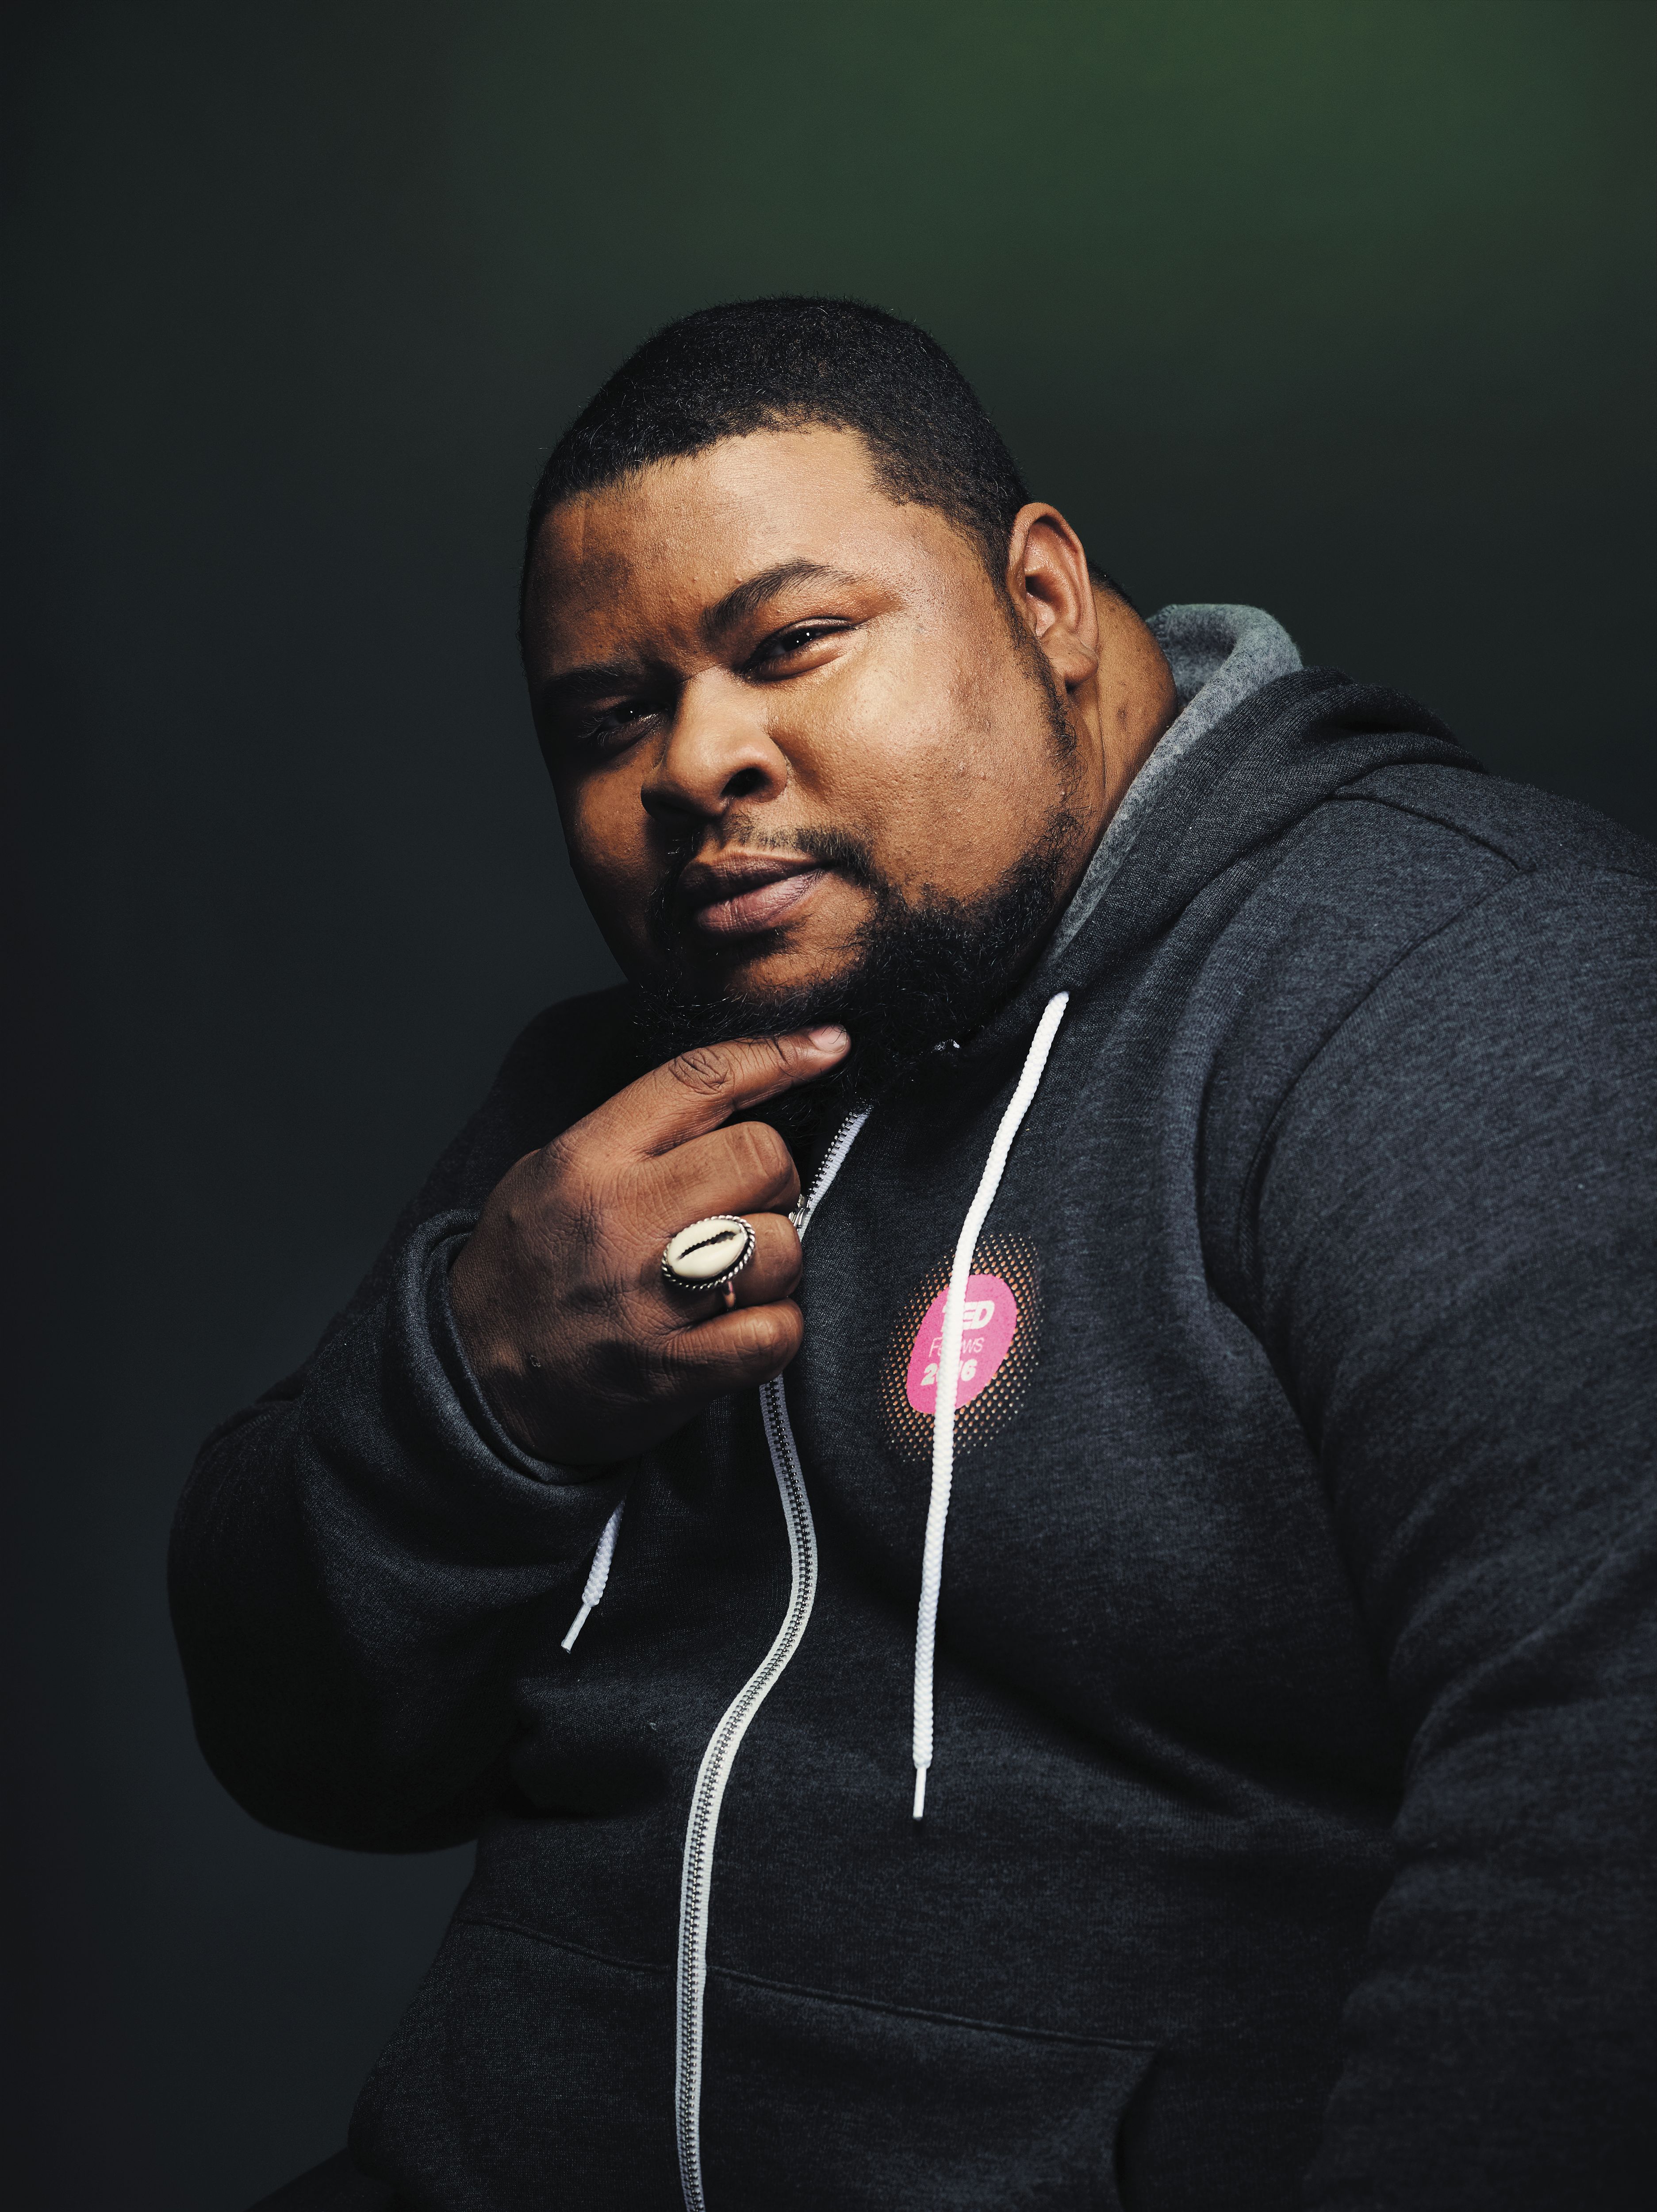 Portrait of Michael W. Twitty, wearing a zip-up hoodie and touching his beard.